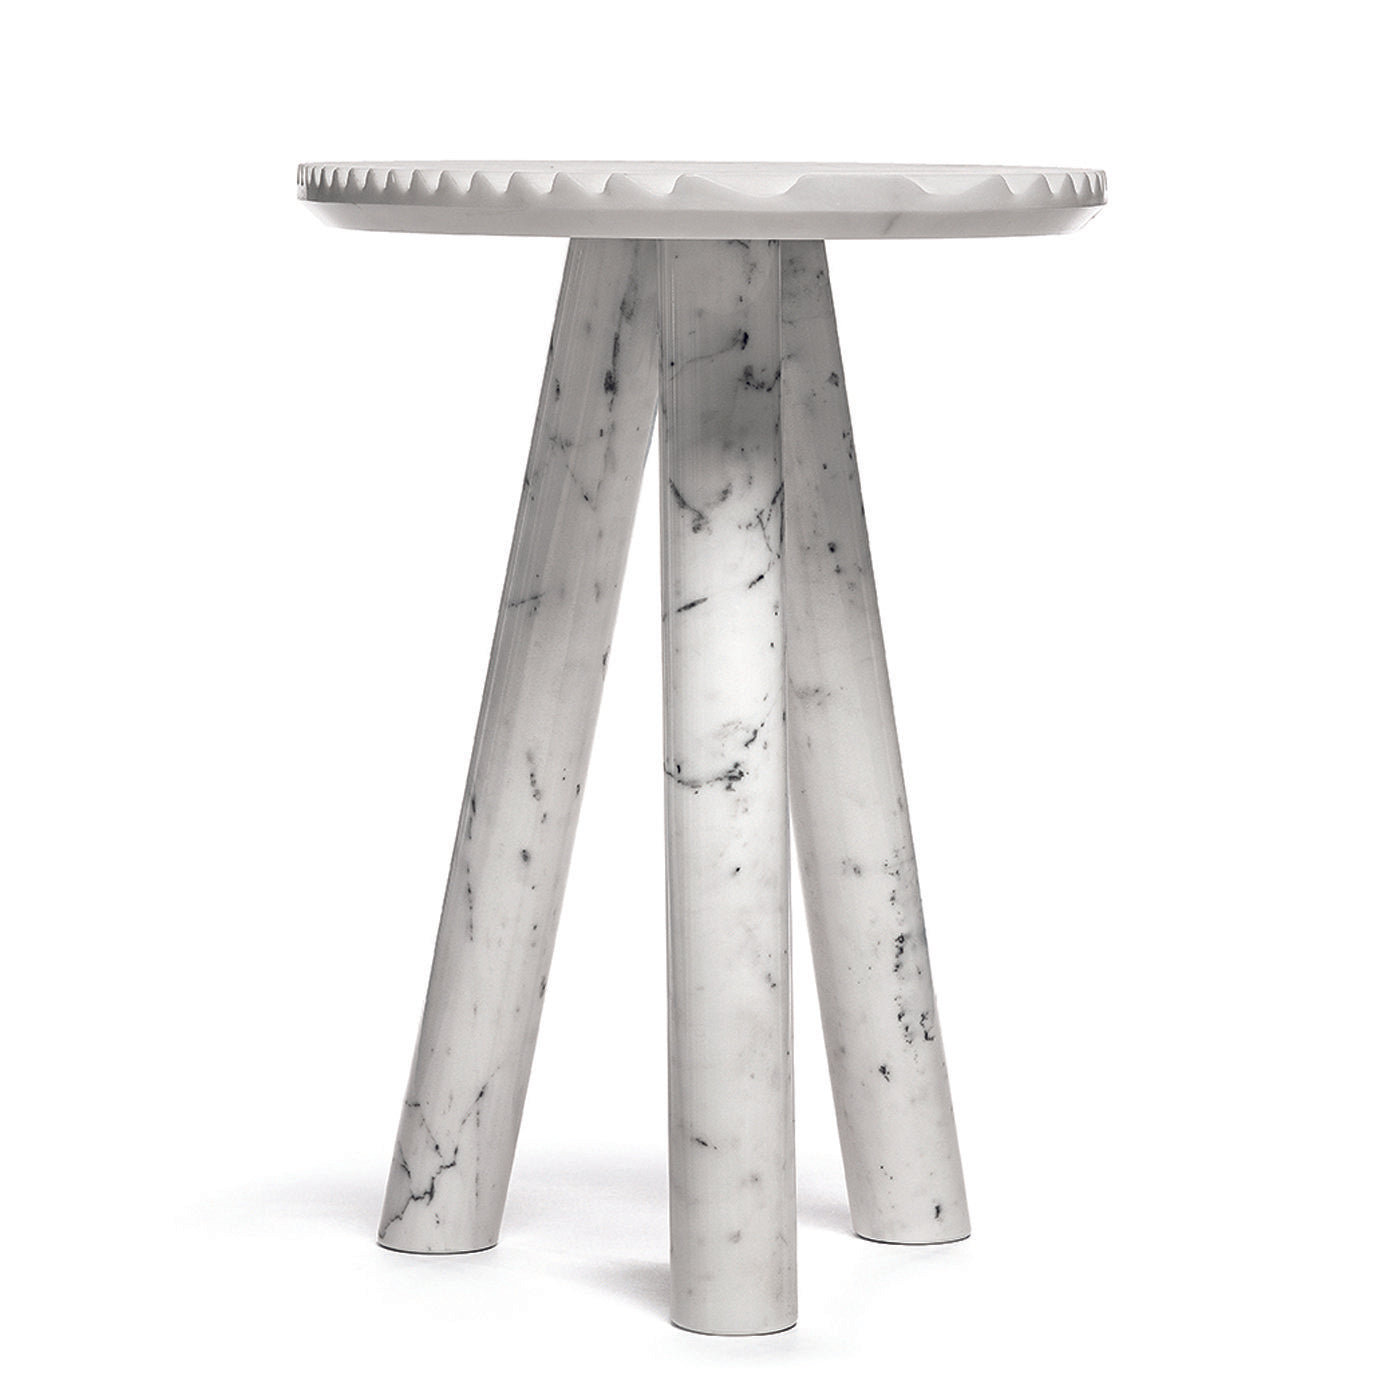 White Rabbet Side Table by Patricia Urquiola - Alternative view 1